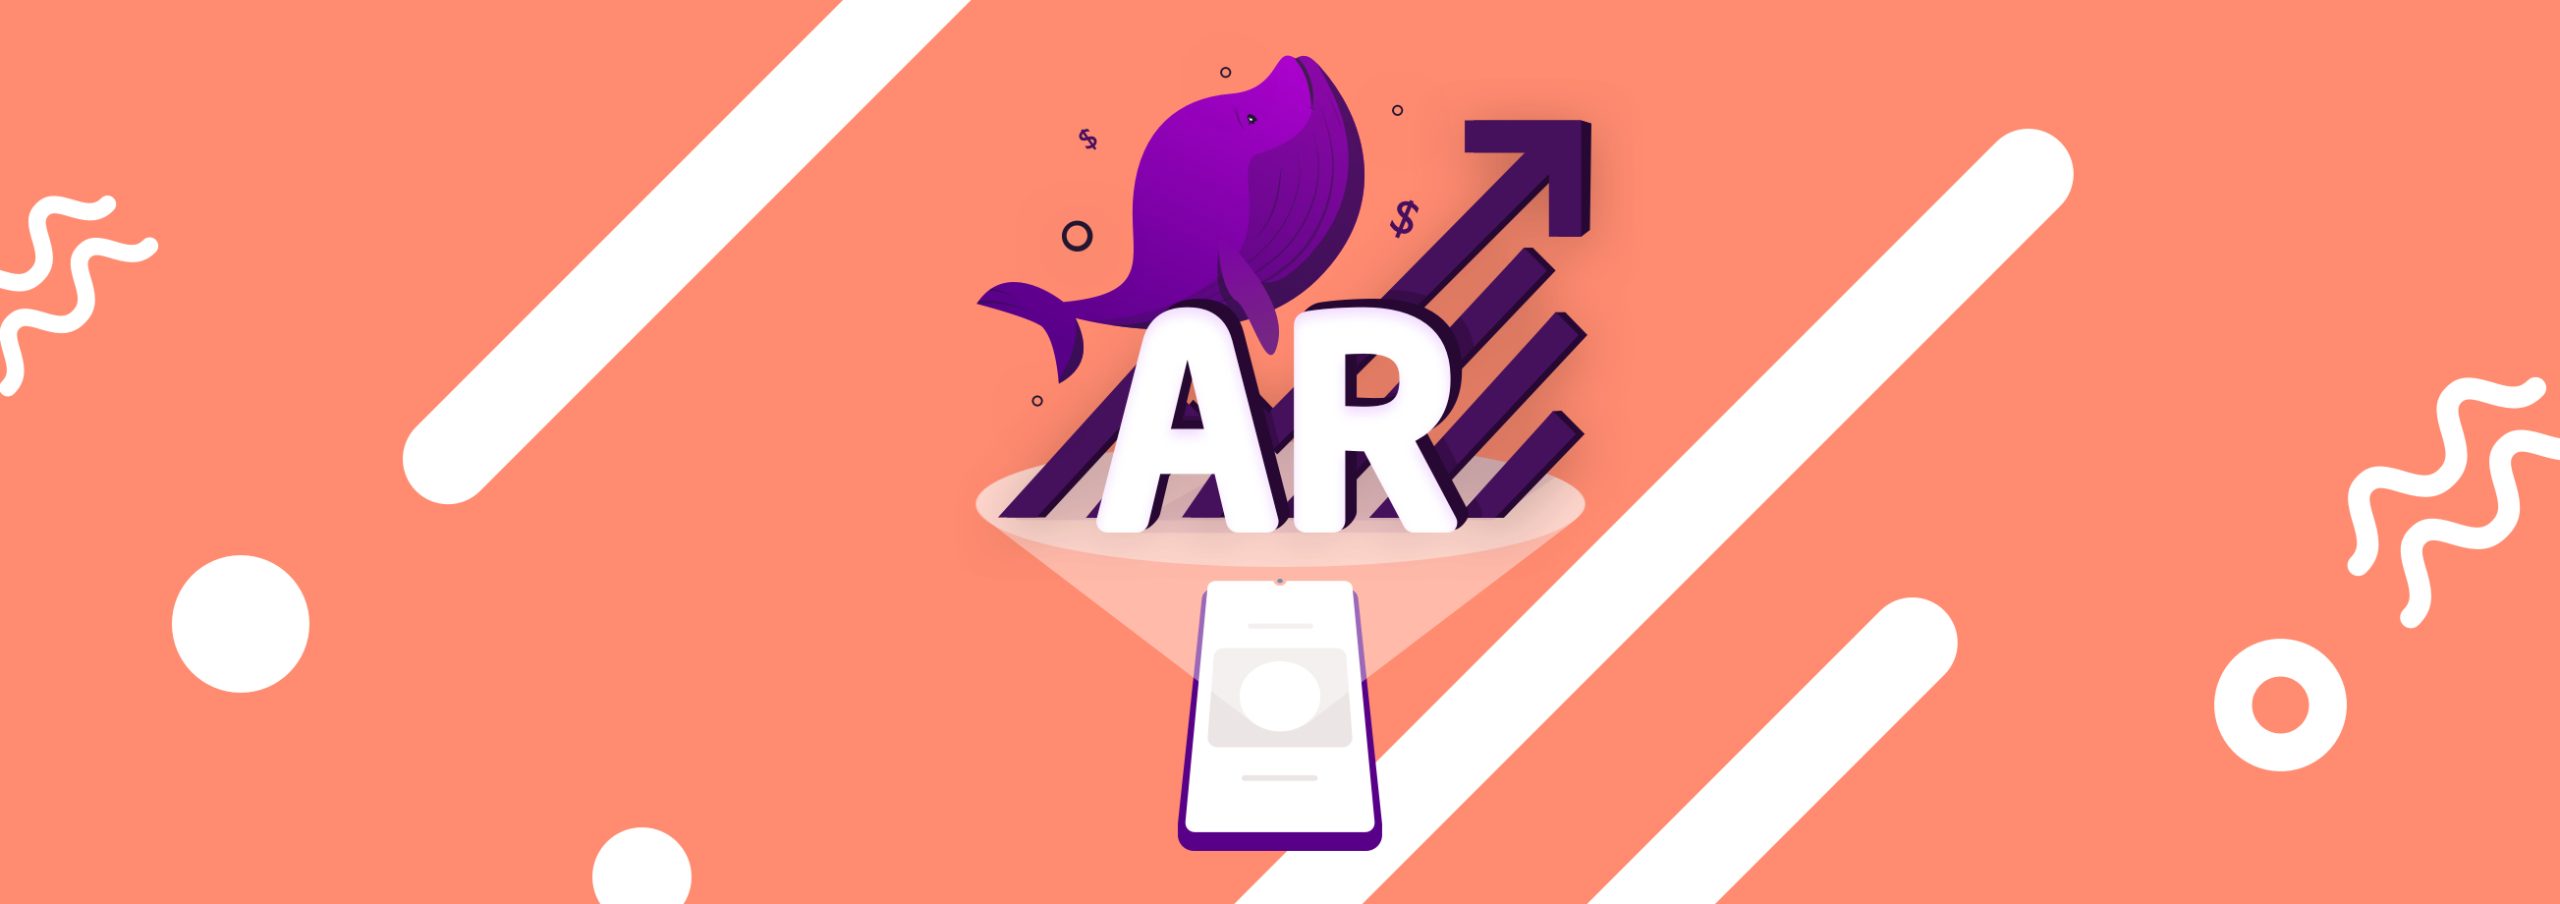 Top 5 uses of Web AR and its impact on the market